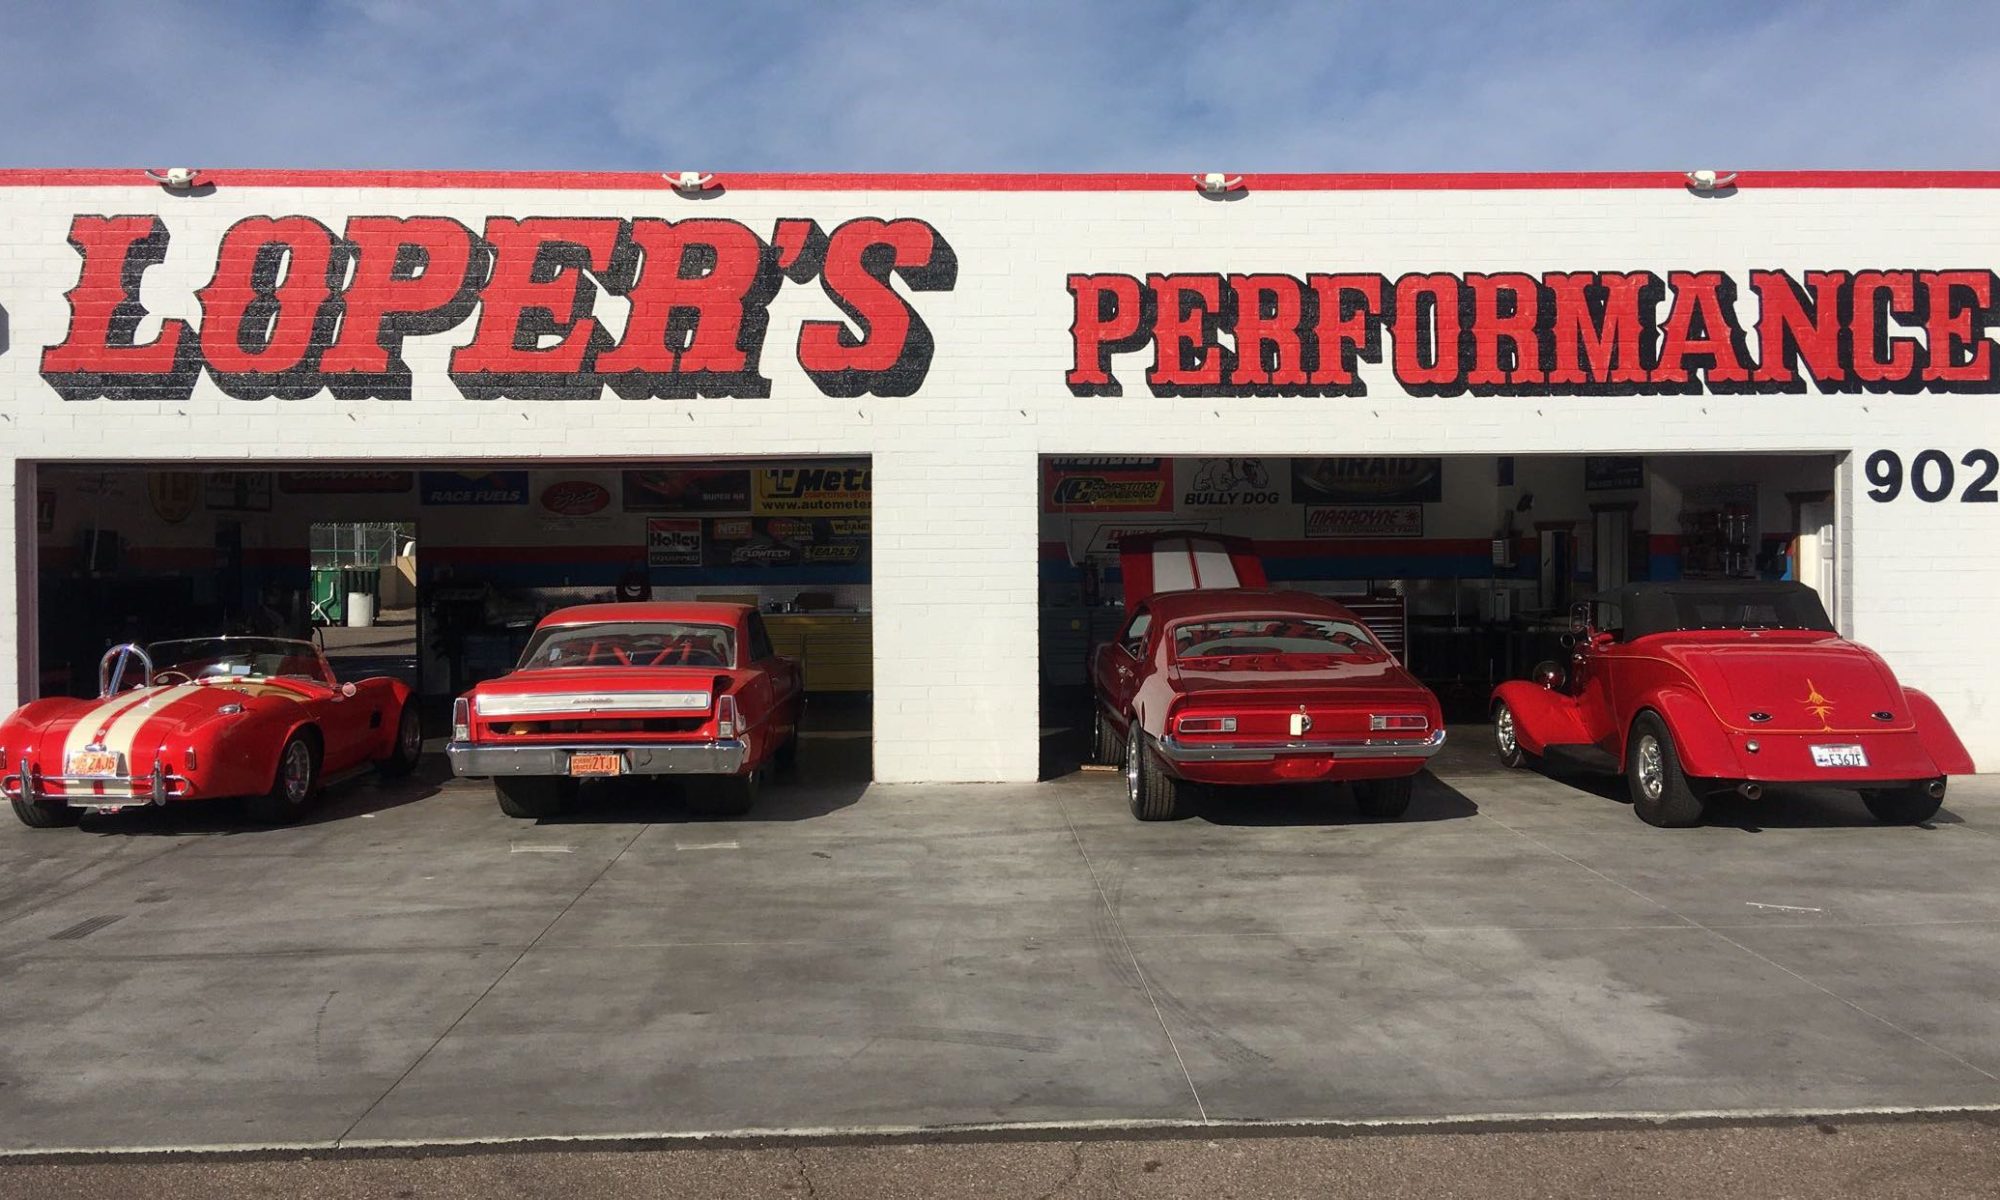 What Is Dyno Tuning? - Lopers Performance Center